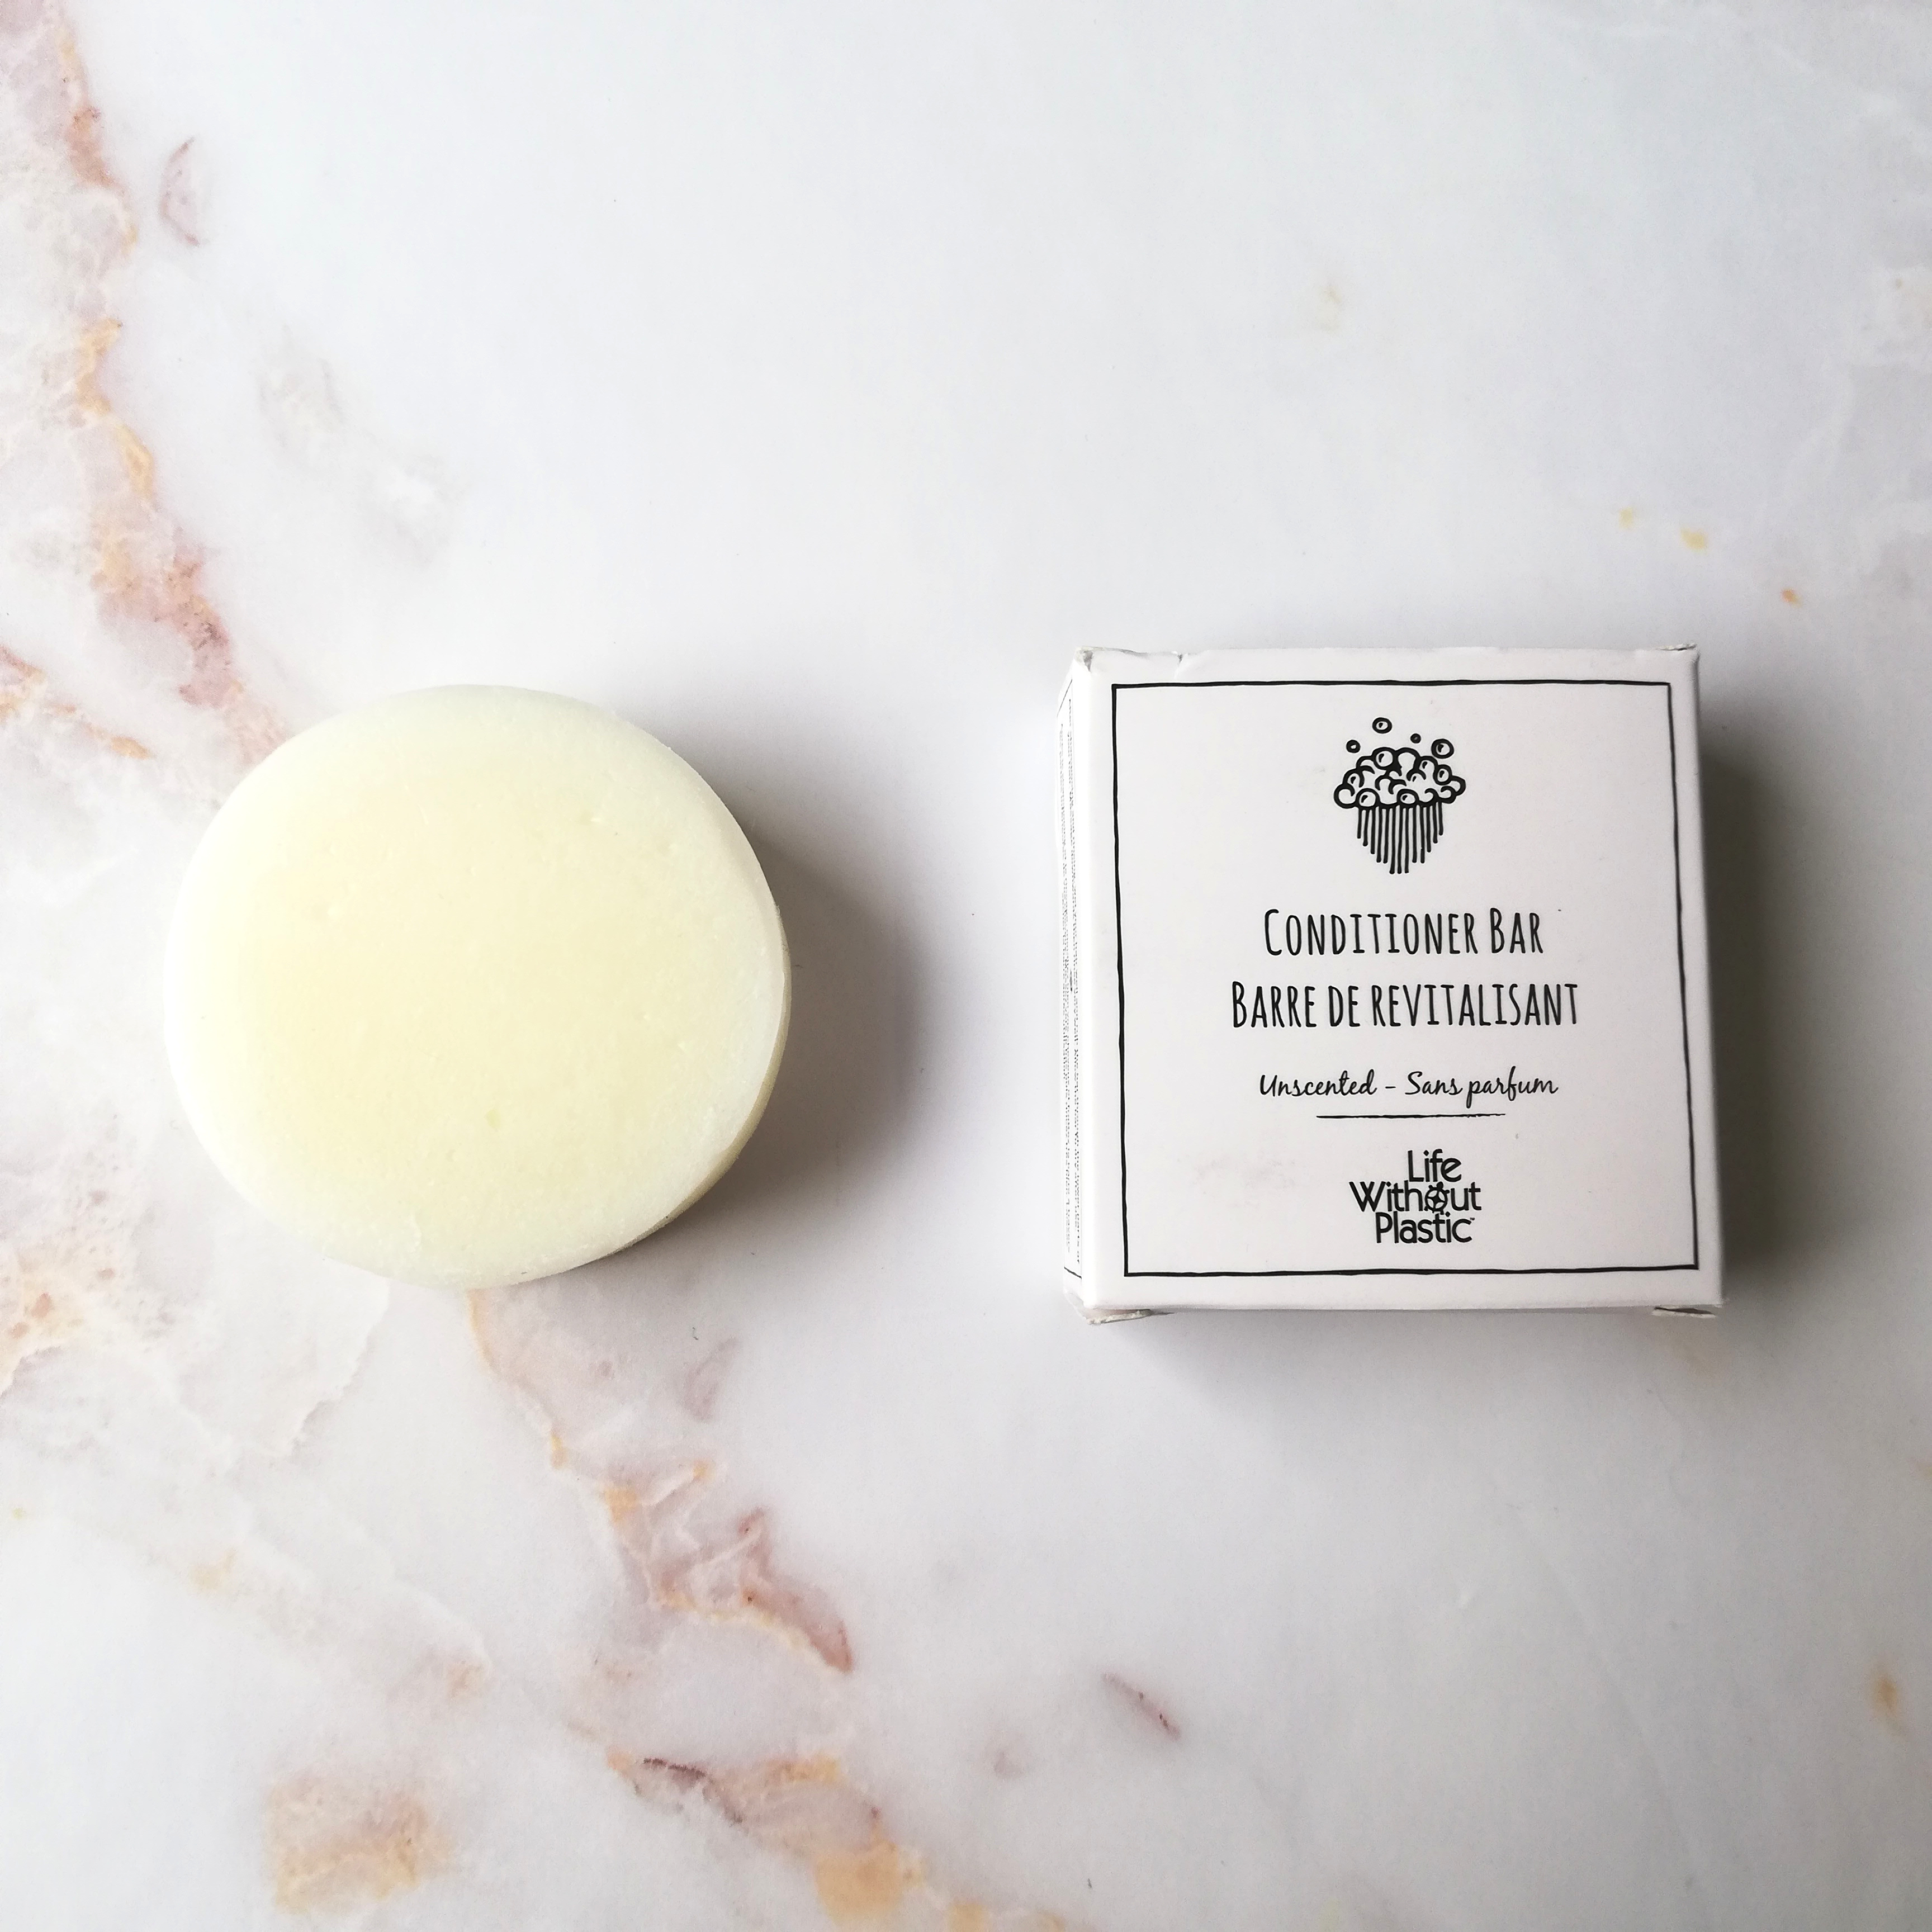 Plastic-free Life Without Plastic Conditioner Bar. 